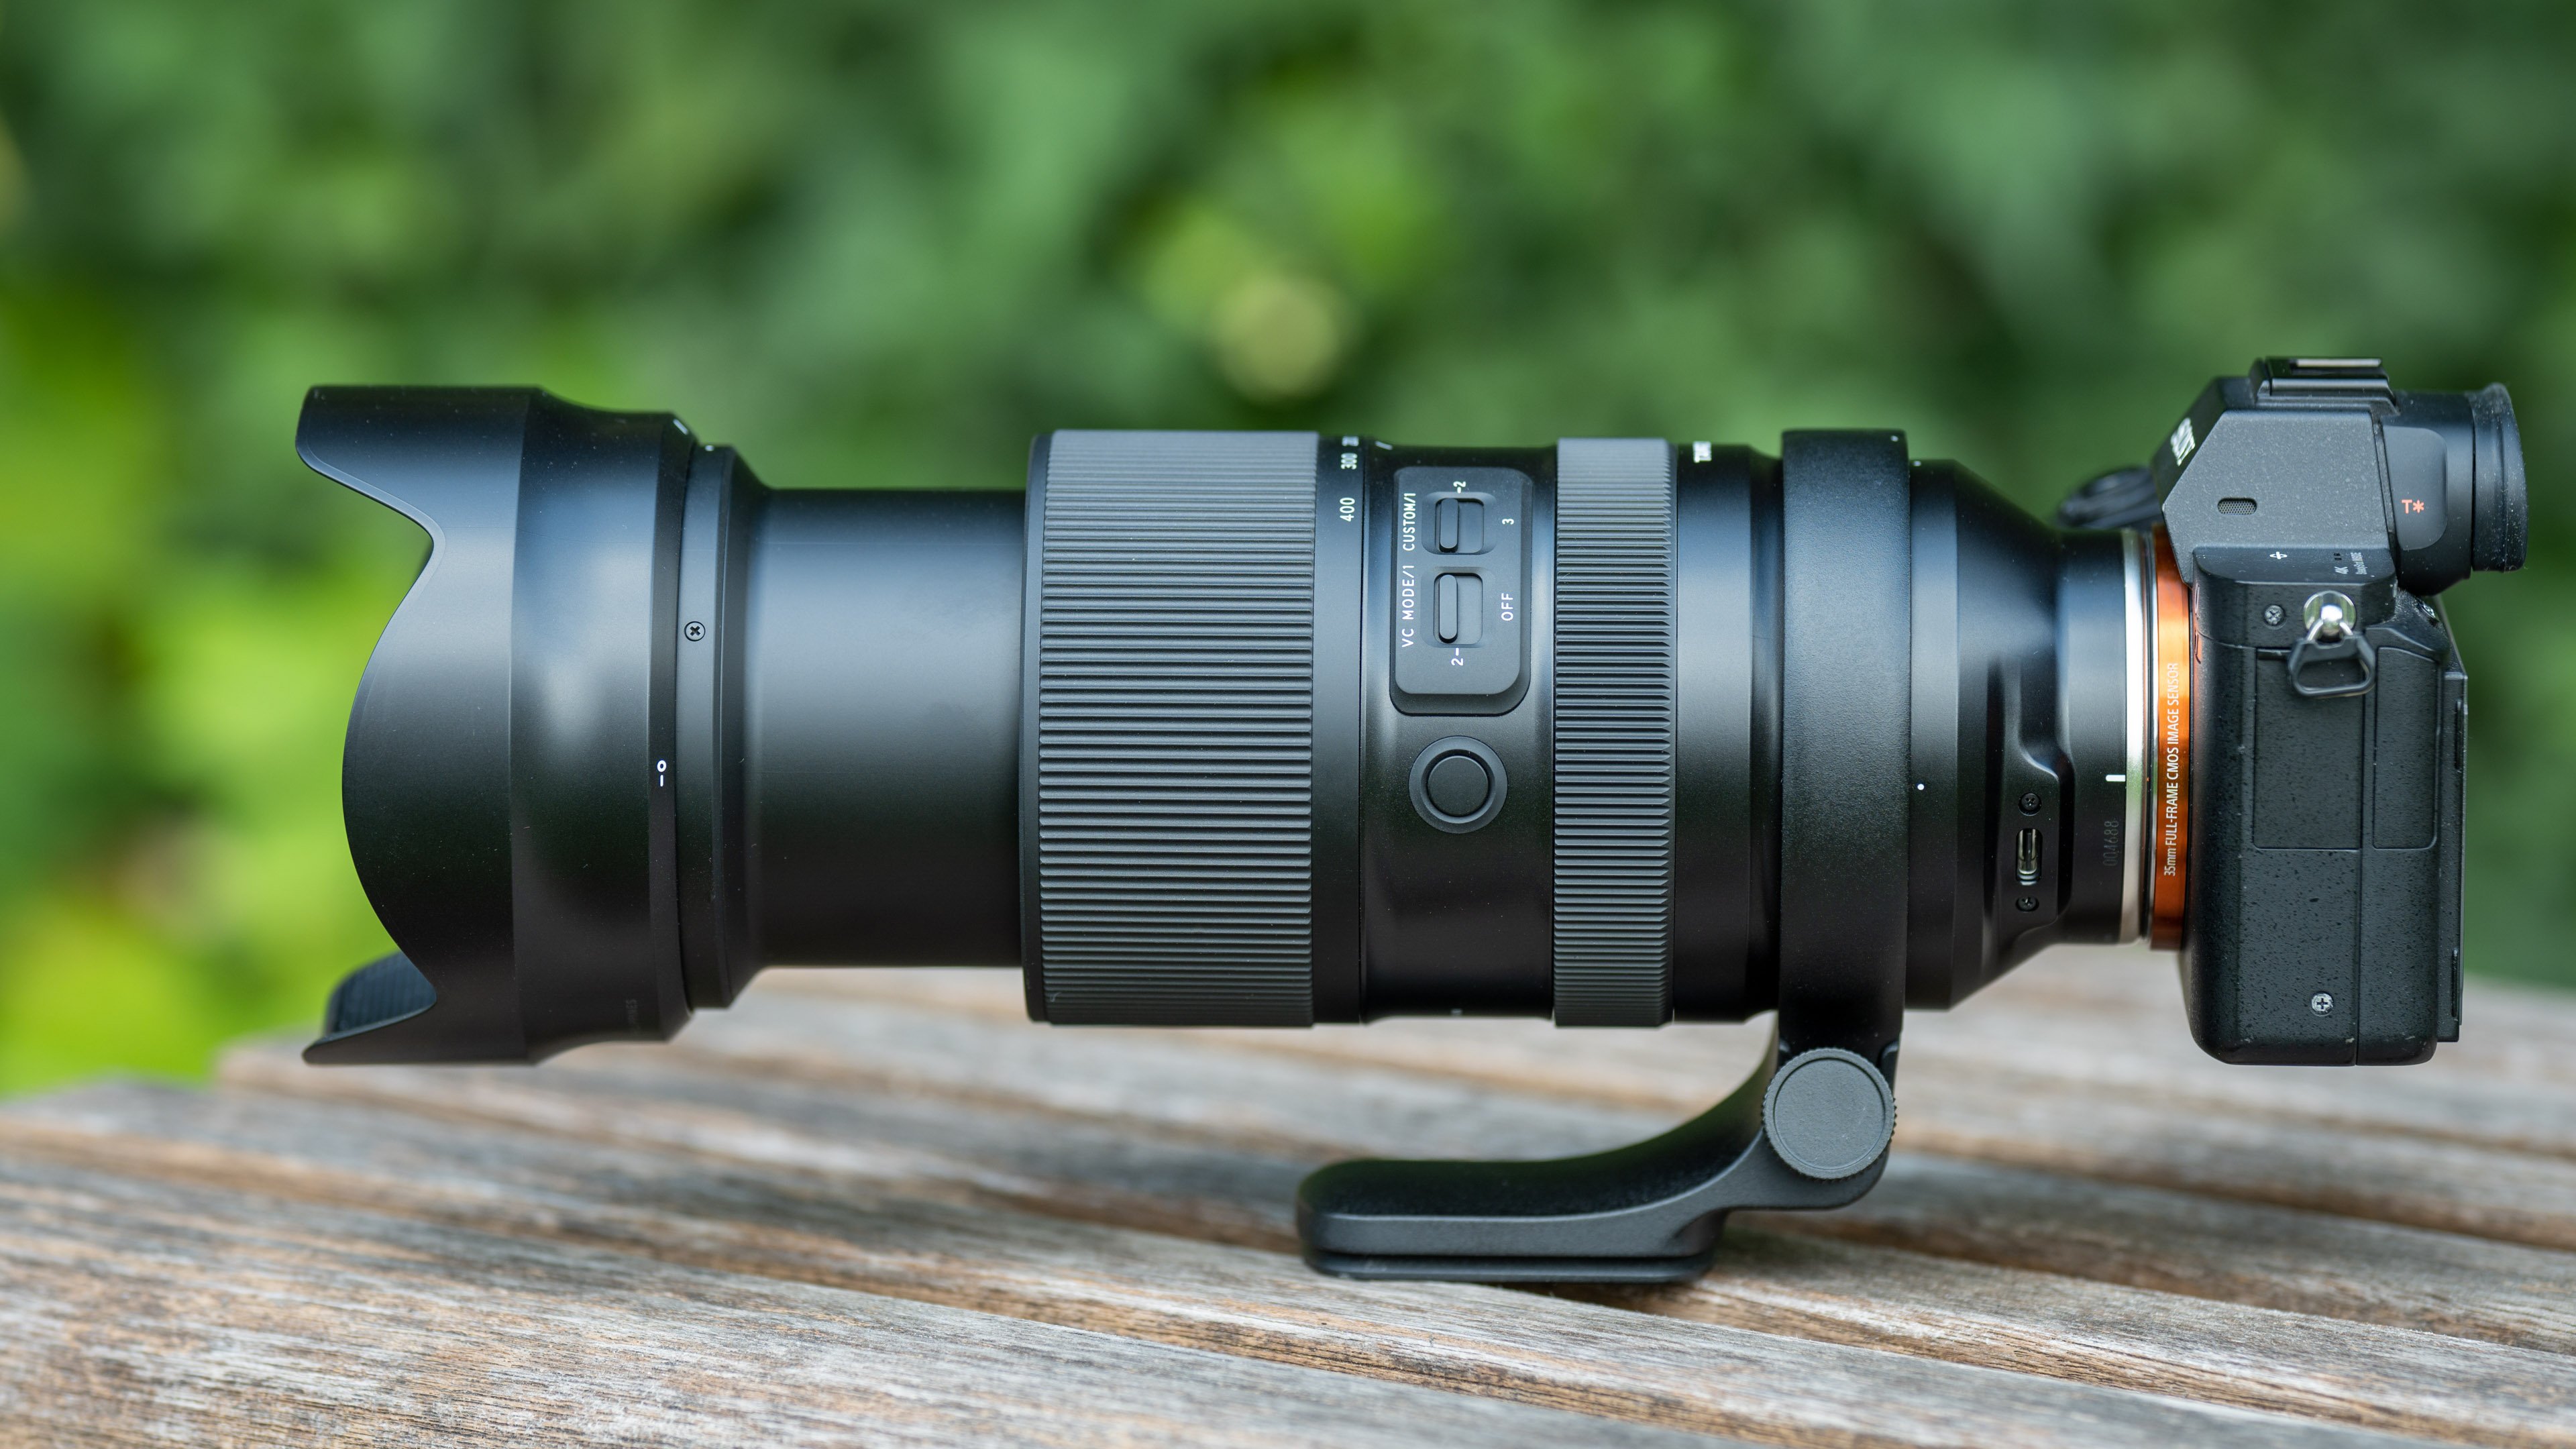 Tamron 50-400mm f4.5-6.3 Di III VC review | Cameralabs